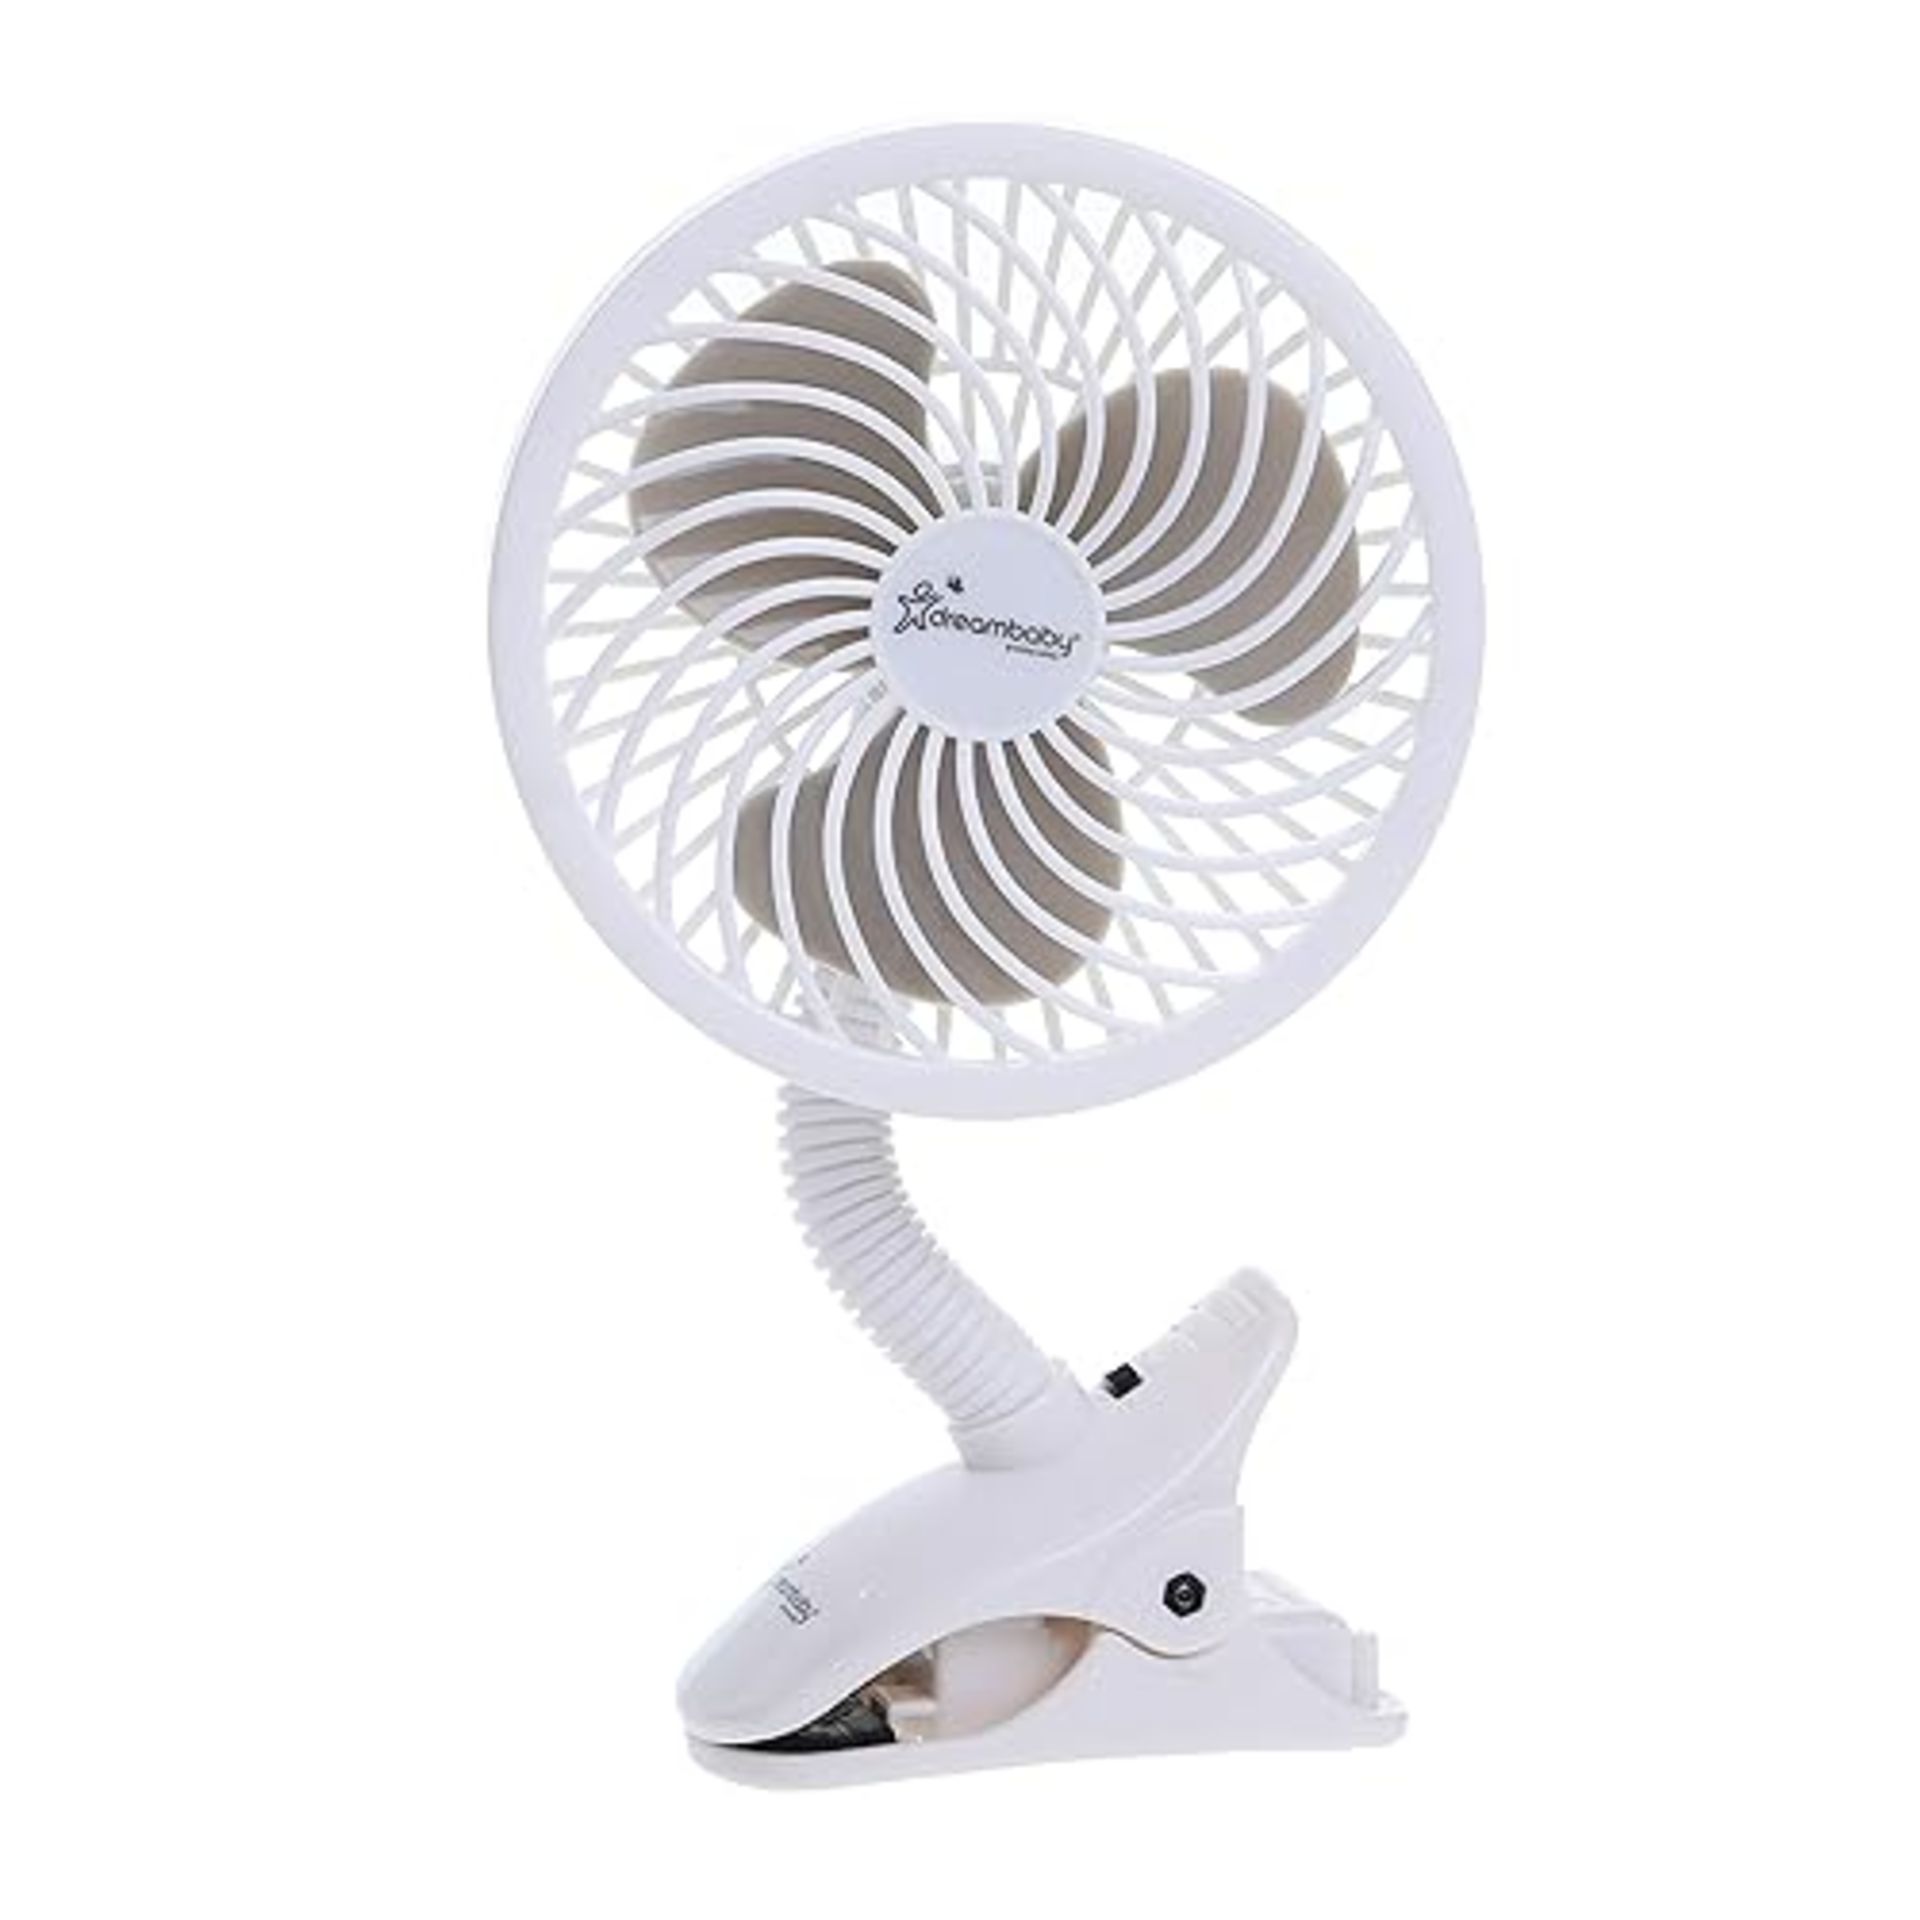 Dreambaby Caged Deluxe EZY-Fit Clip On Fan, White